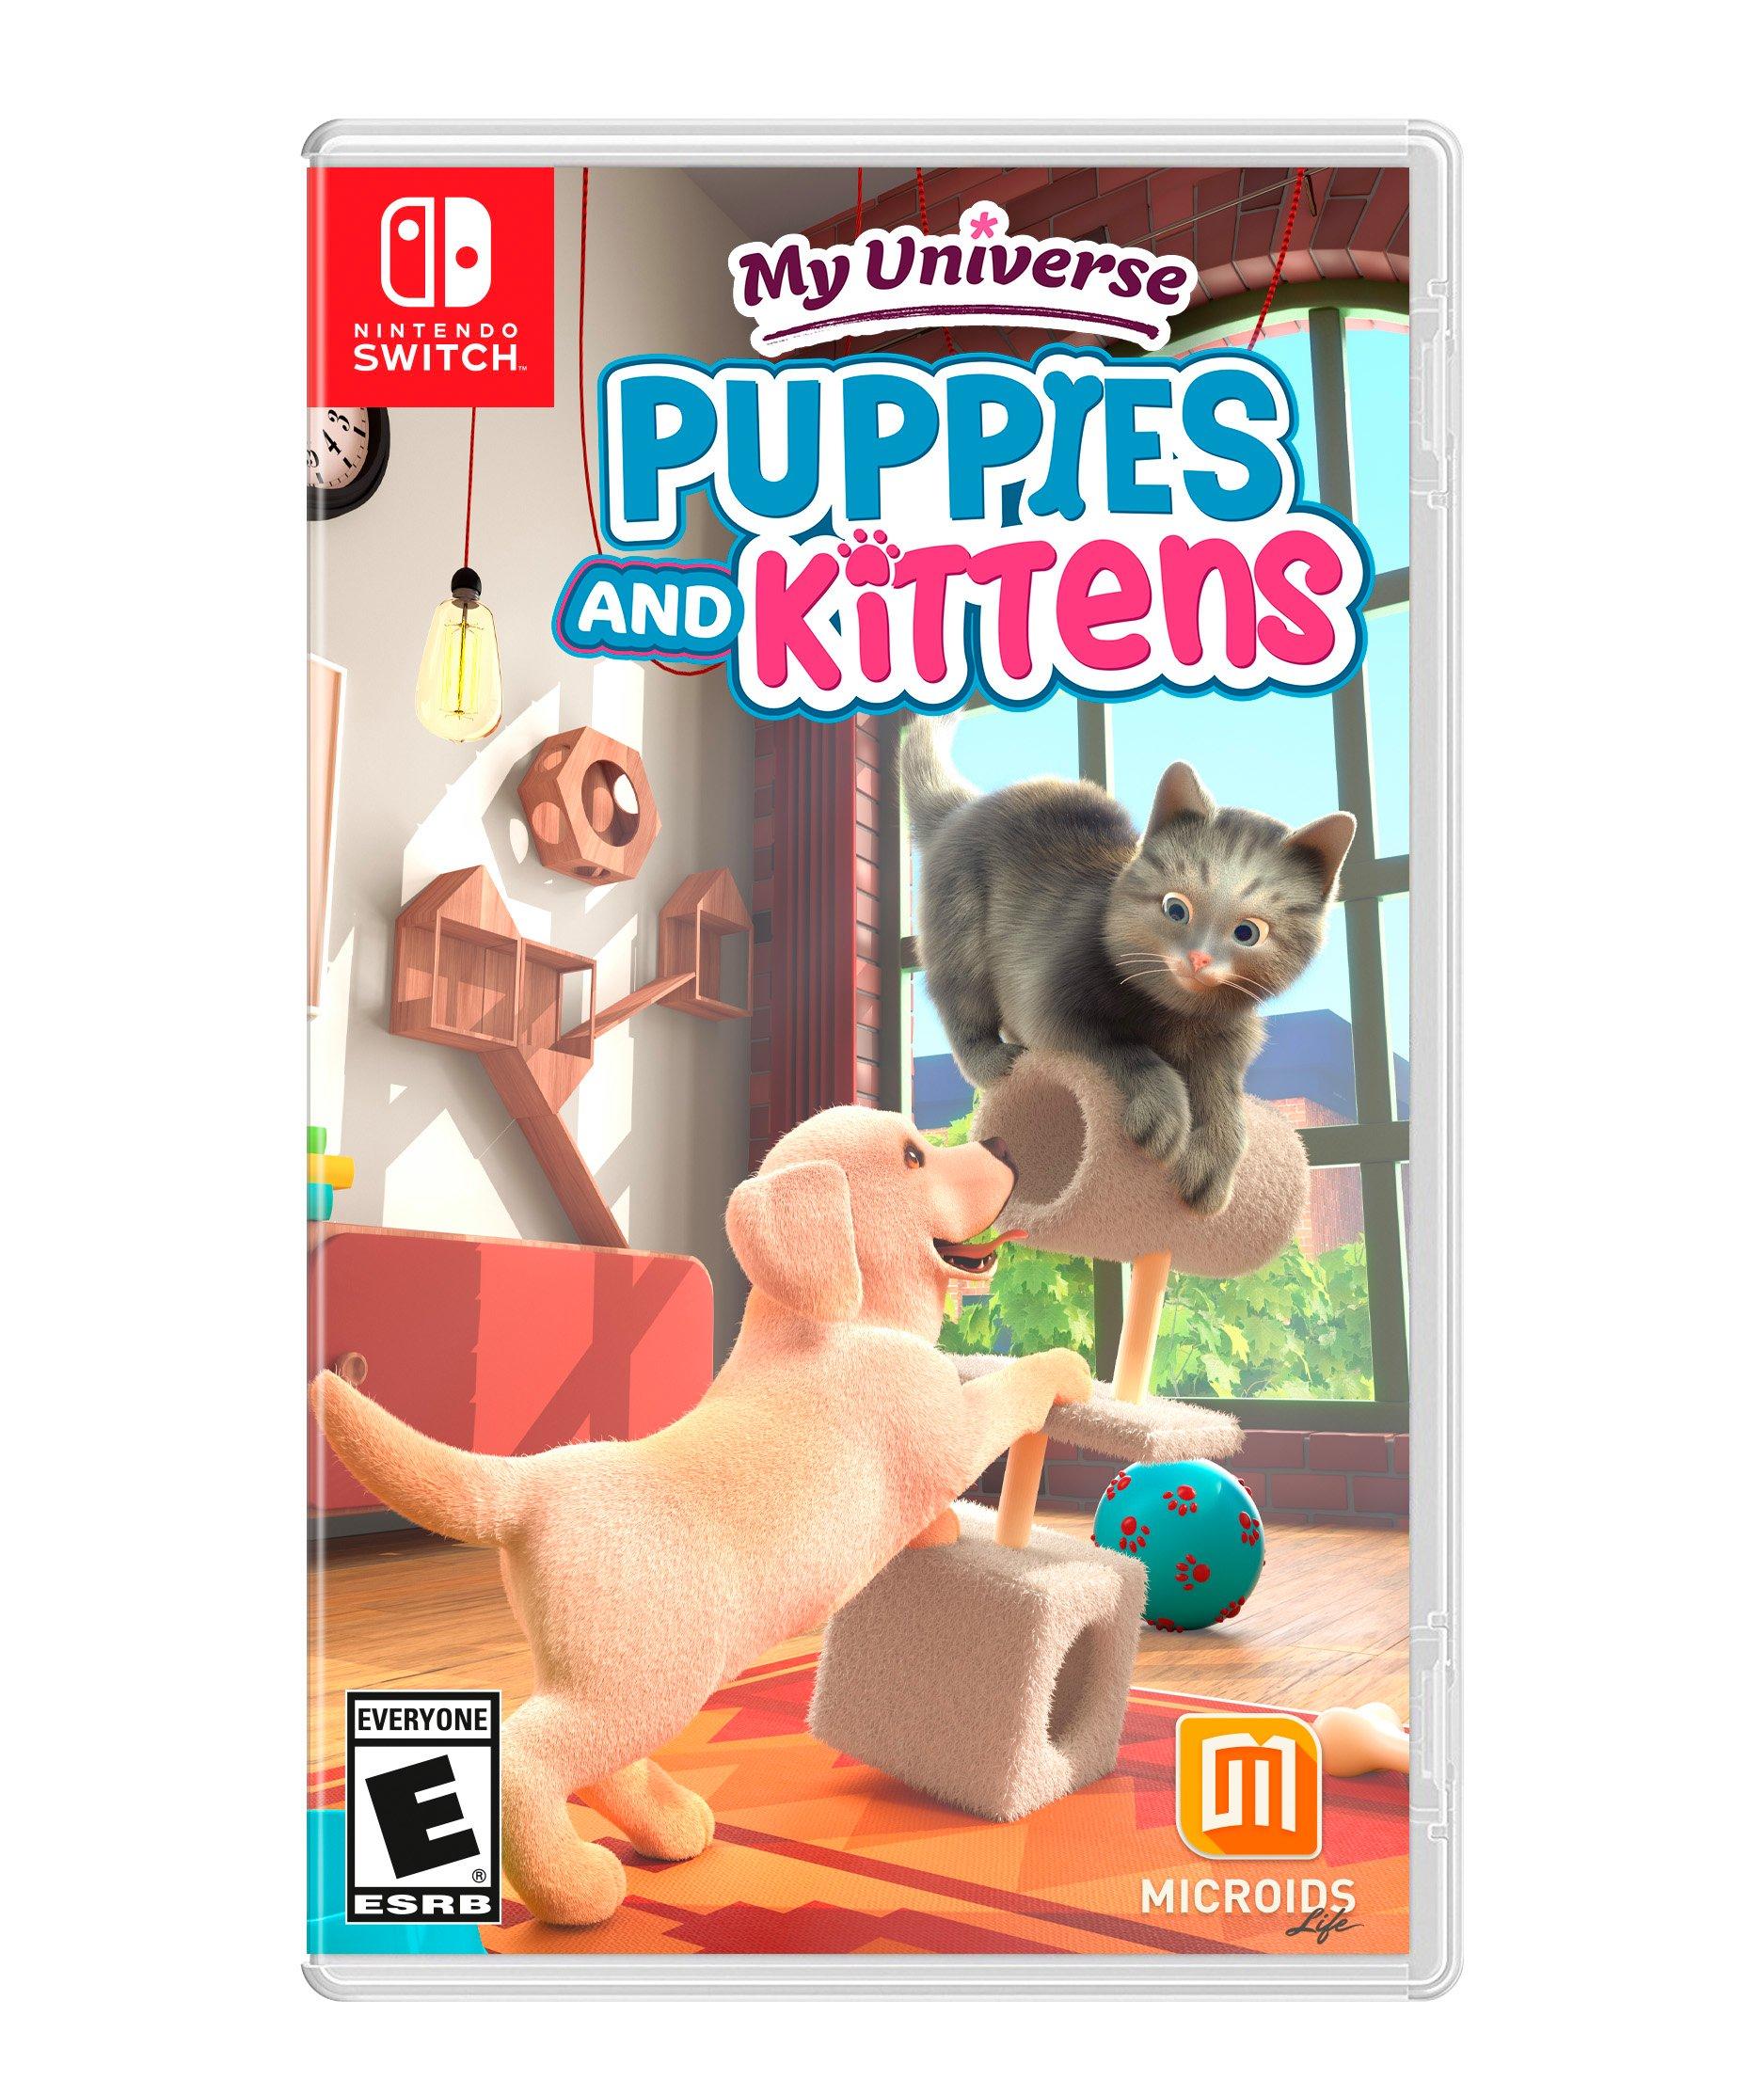 My Universe: Puppies and Kittens, Maximum Games, Nintendo Switch